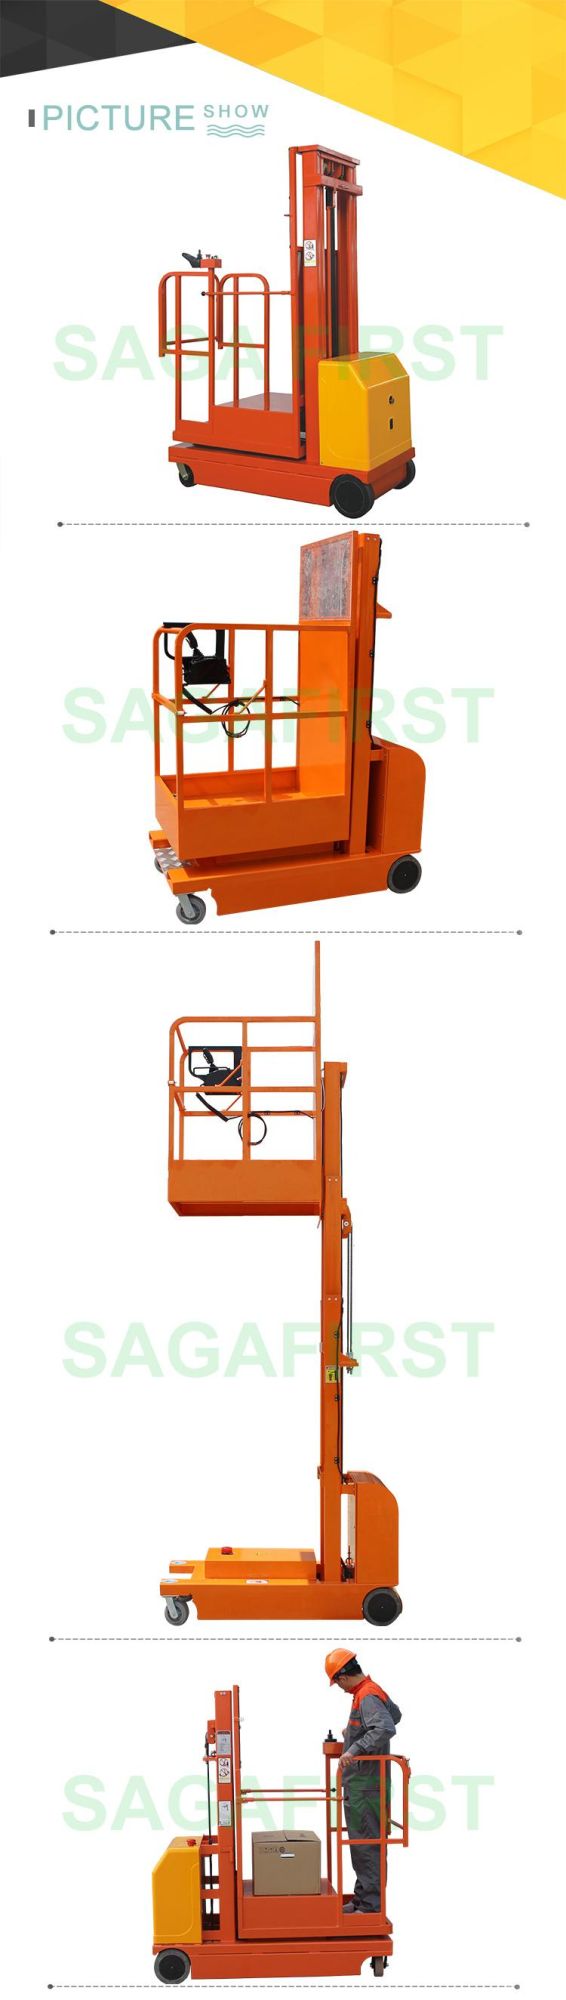 2021 Best Selling 4.5m High Level Electric Order Picker